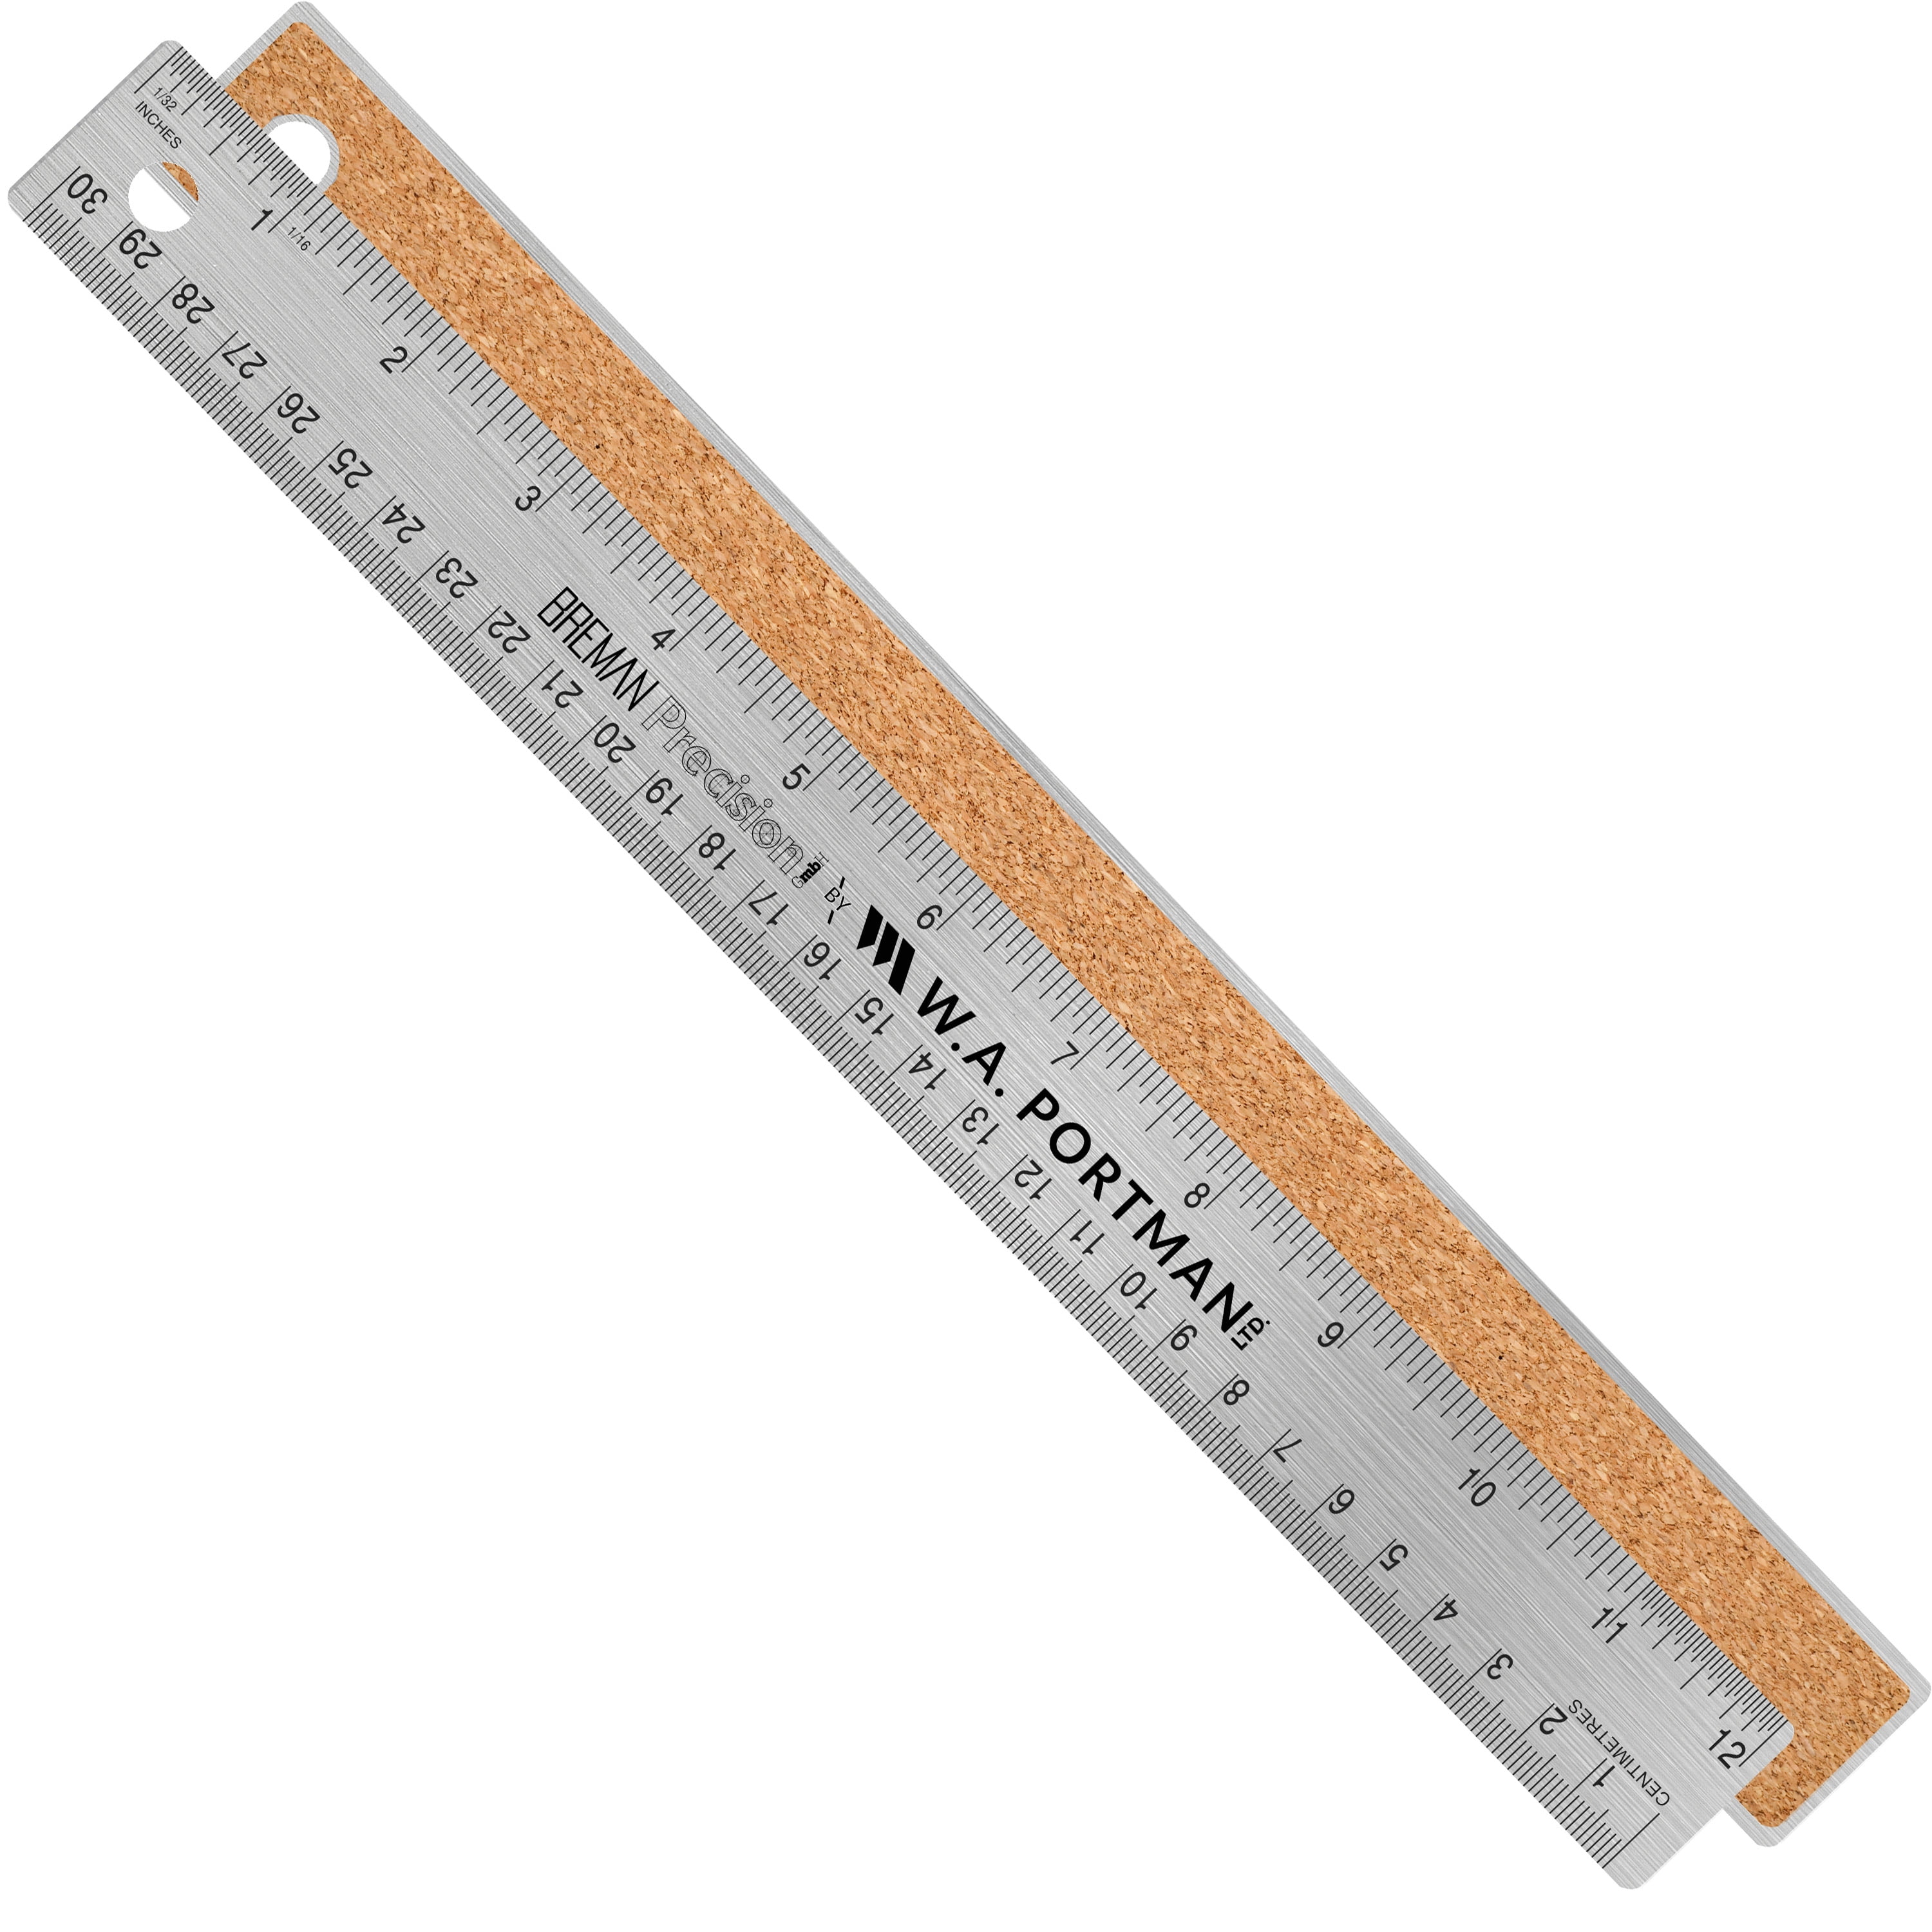 Heyco Precision Steel Ruler (Chesterman Type), 300mm/12